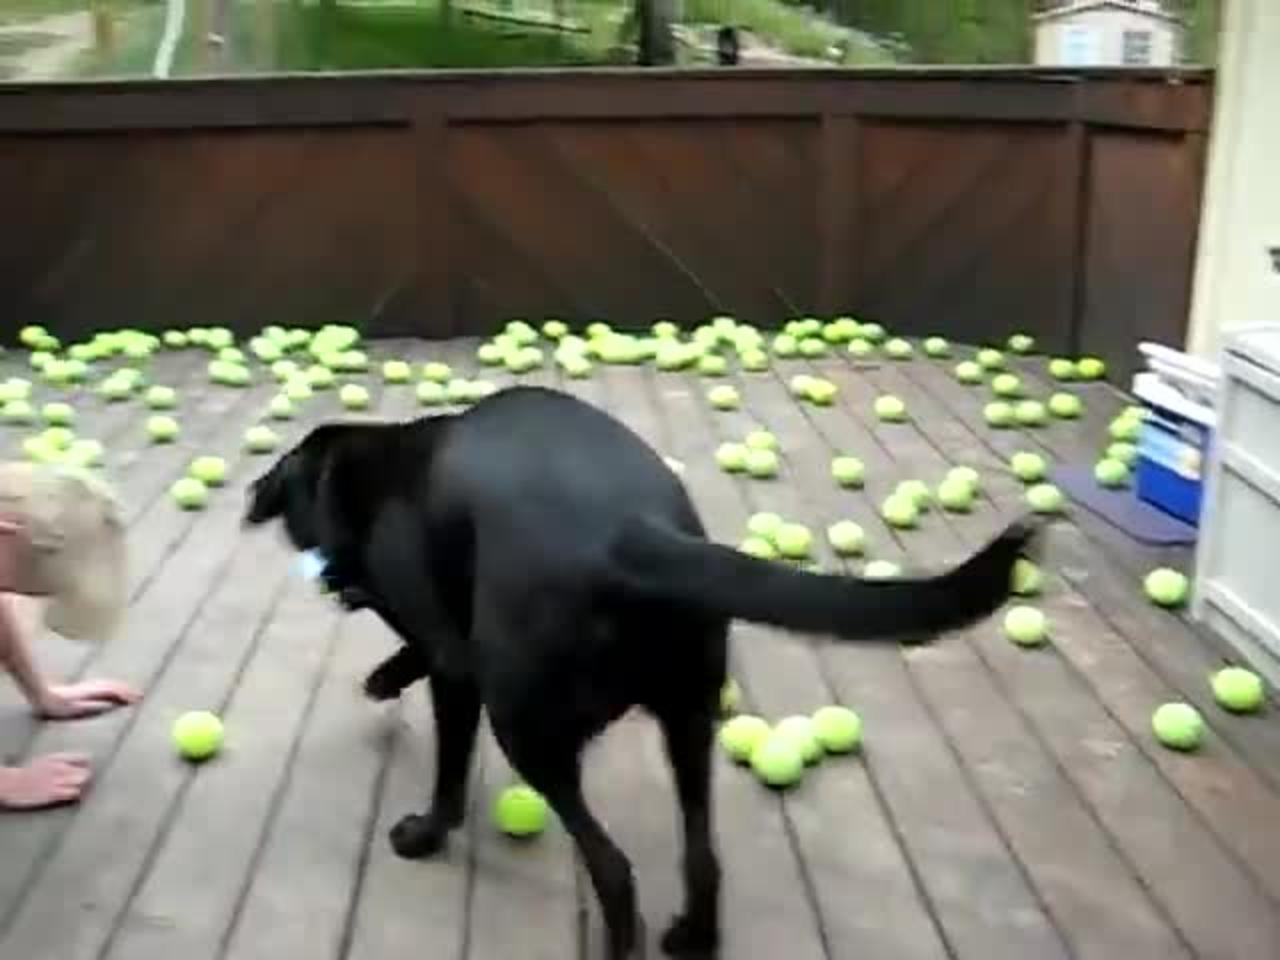 Dog Fan Of Tennis ball Gets To Chase Theme To His Heart's Content